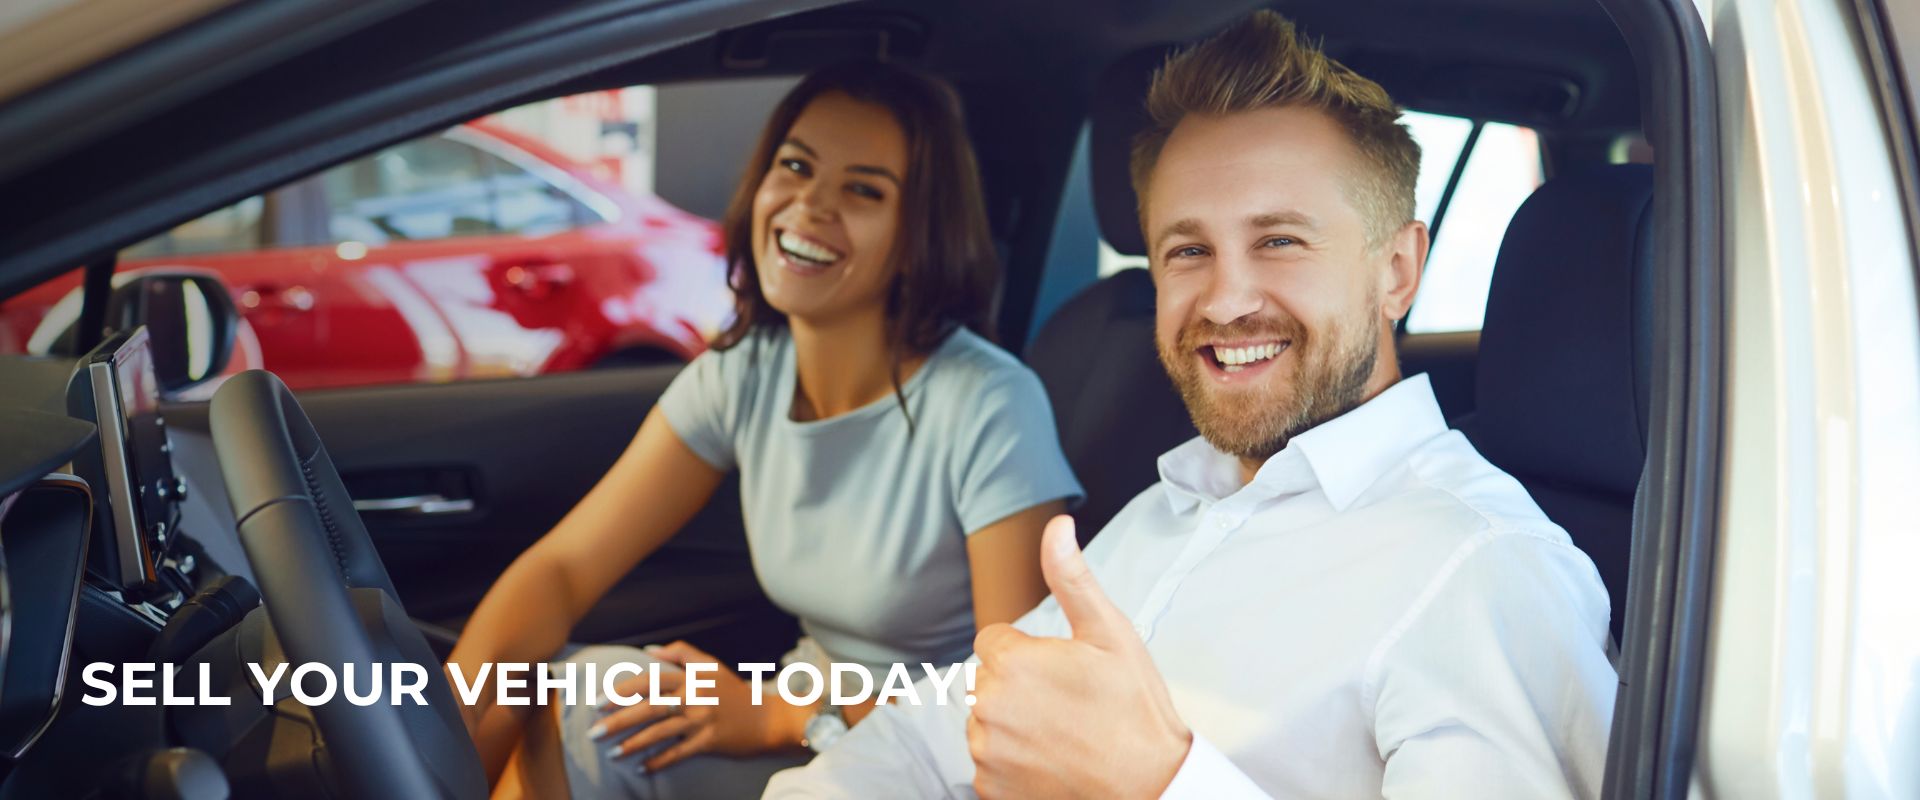 Sell your vehicle today!